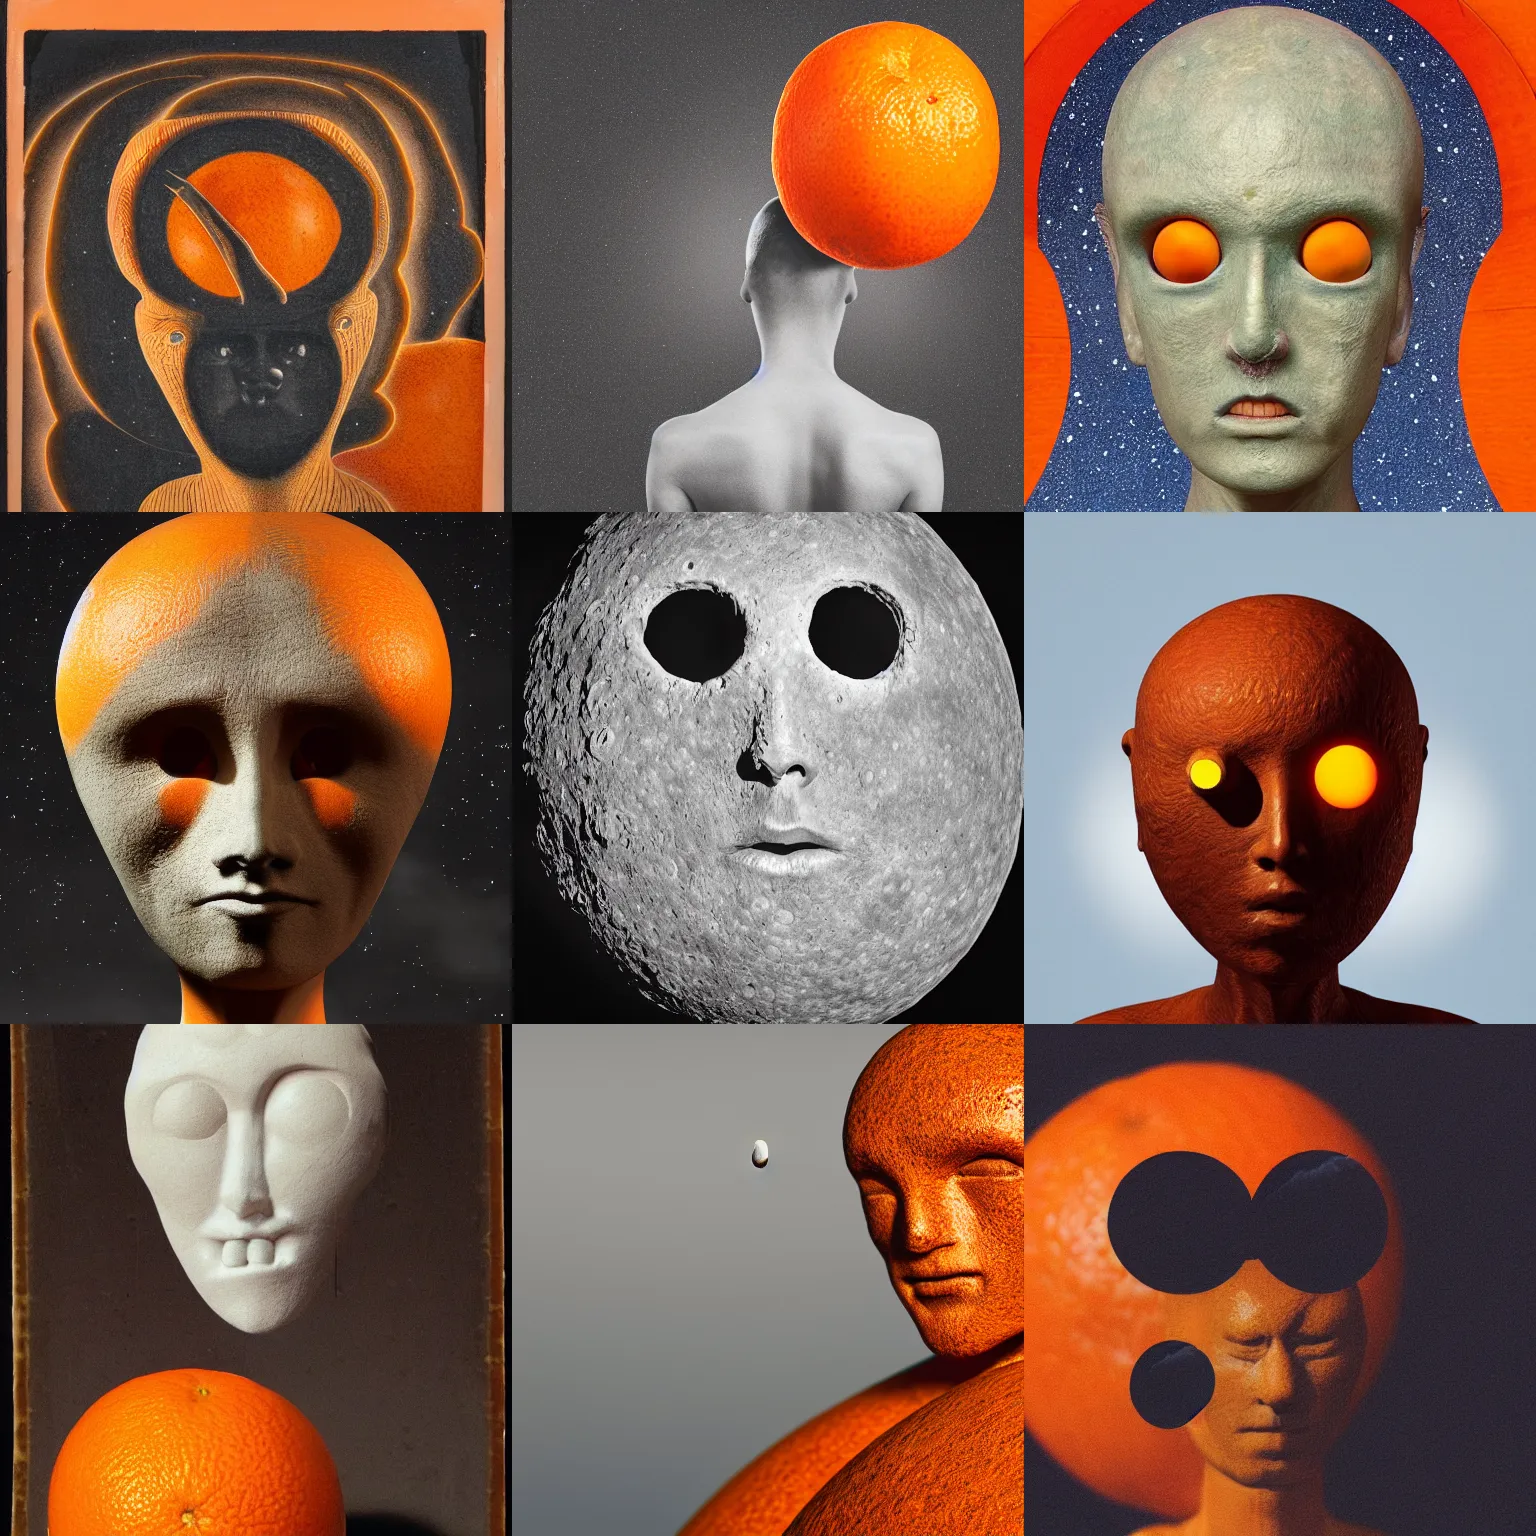 Prompt: portrait of humanoid with moon shaped head, looking at the orange fruit, highly detailed, photography,